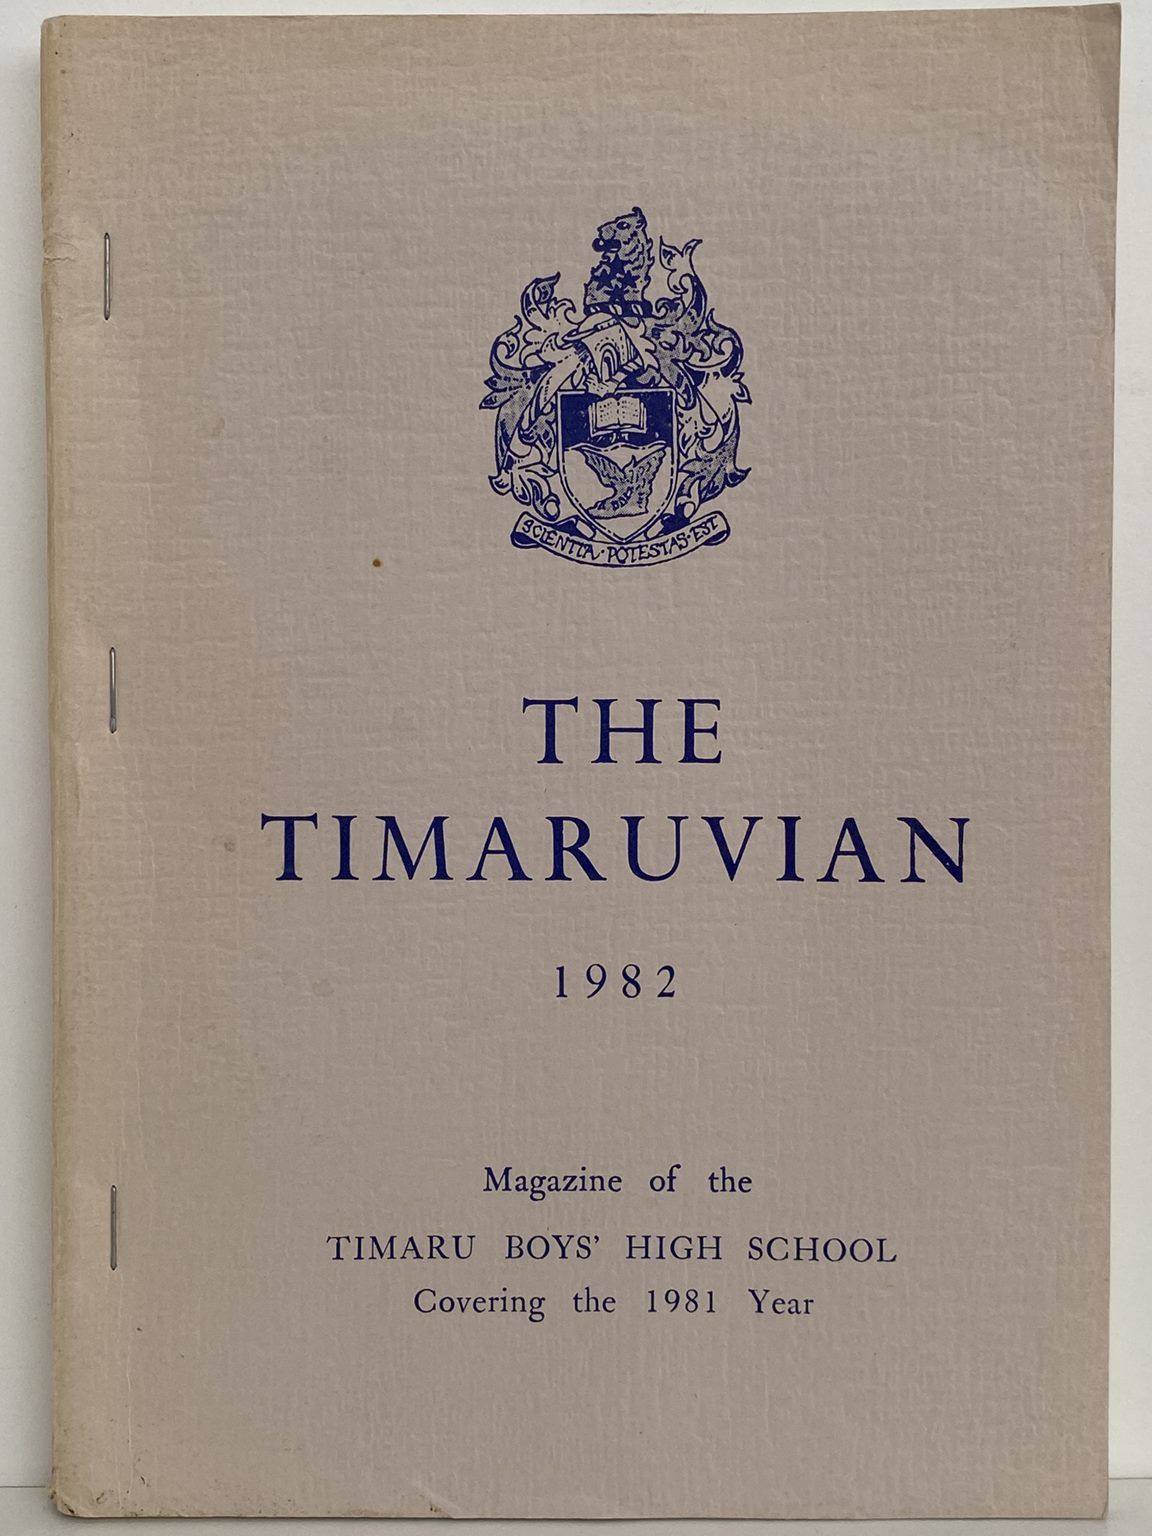 THE TIMARUVIAN: Magazine of the Timaru Boys' High School and its Old Boys' Association 1982